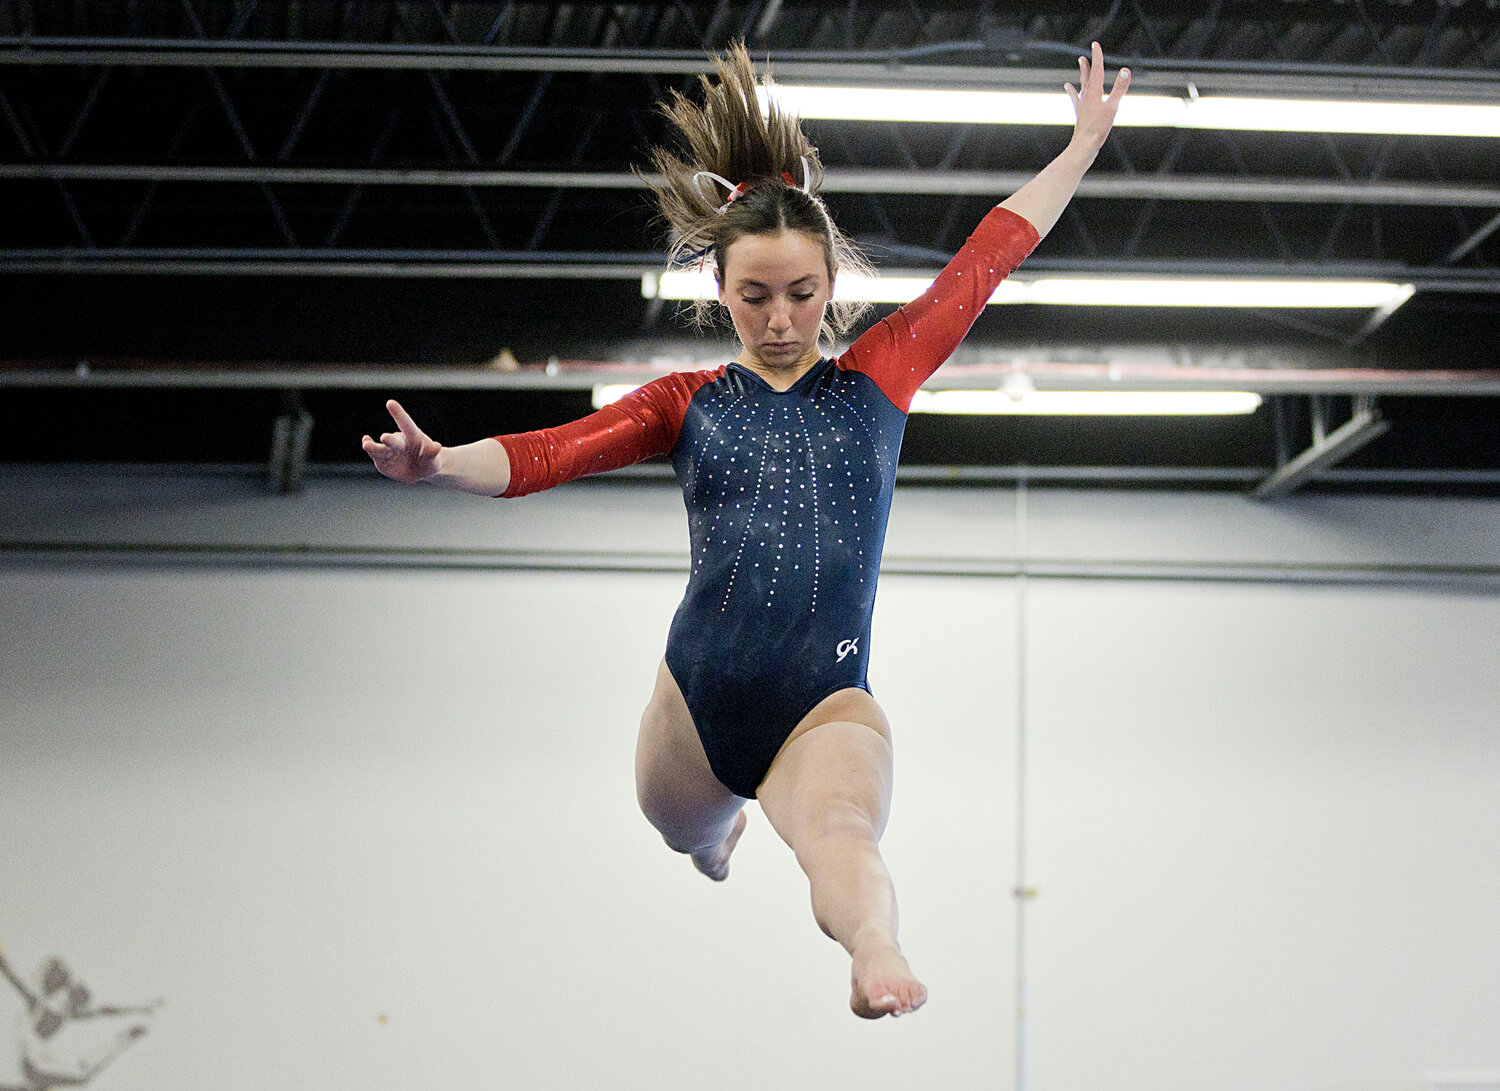 The Patriots’ Rowan Snyder leaps across the beam while competing in Sunday’s meet against Mt. Hope High School. She earned a 9.25 on the event and led her team with an all-around score of 35.0.